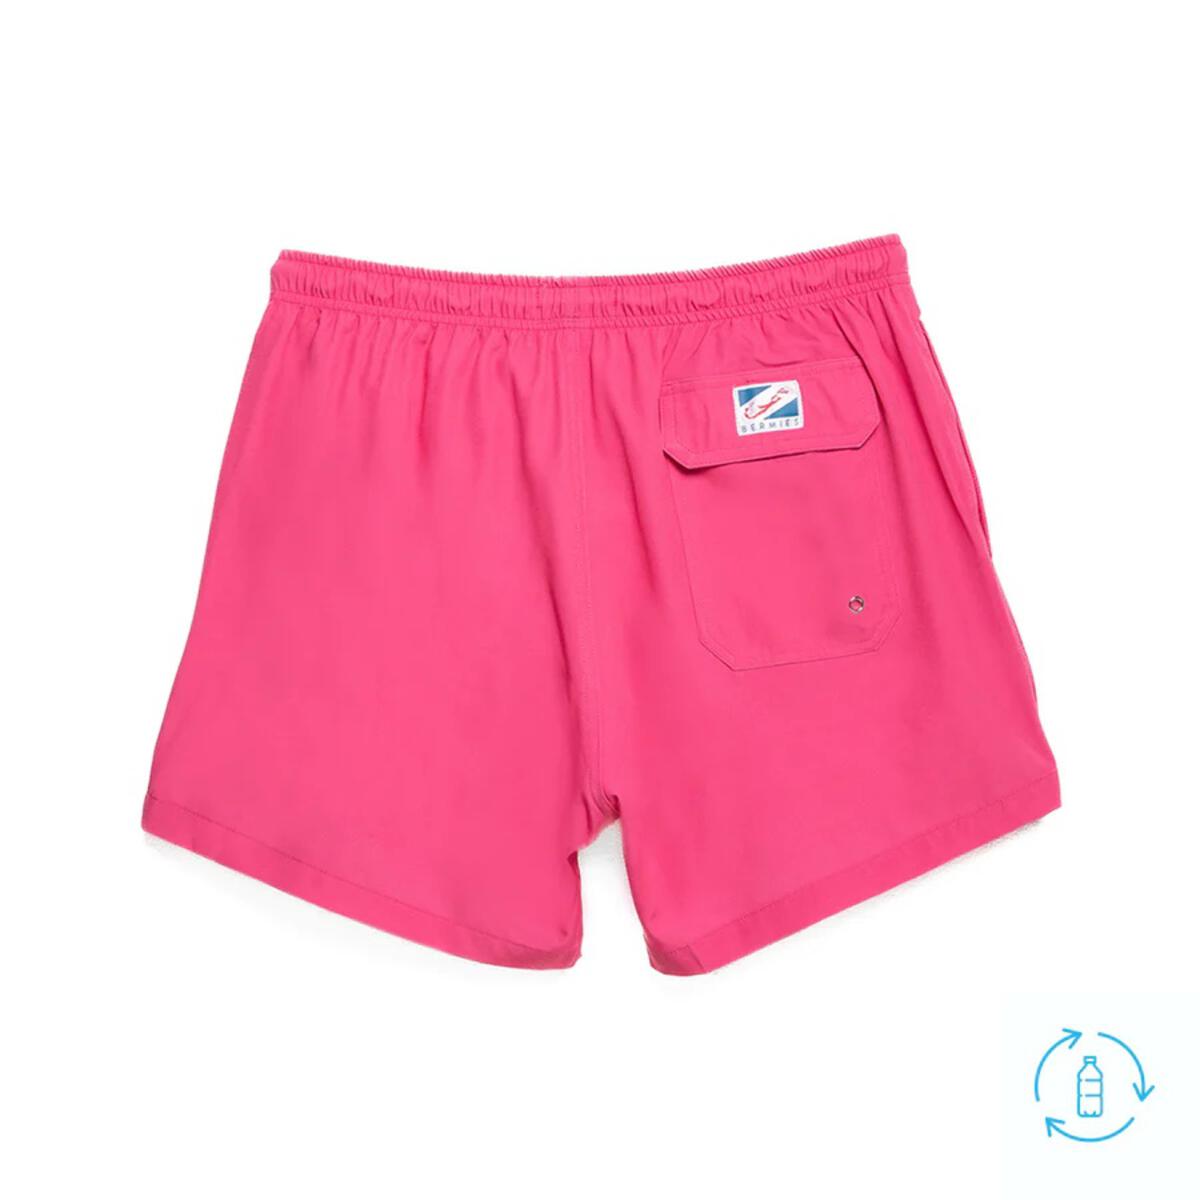 Pink to Palm Color Change Swim Trunks